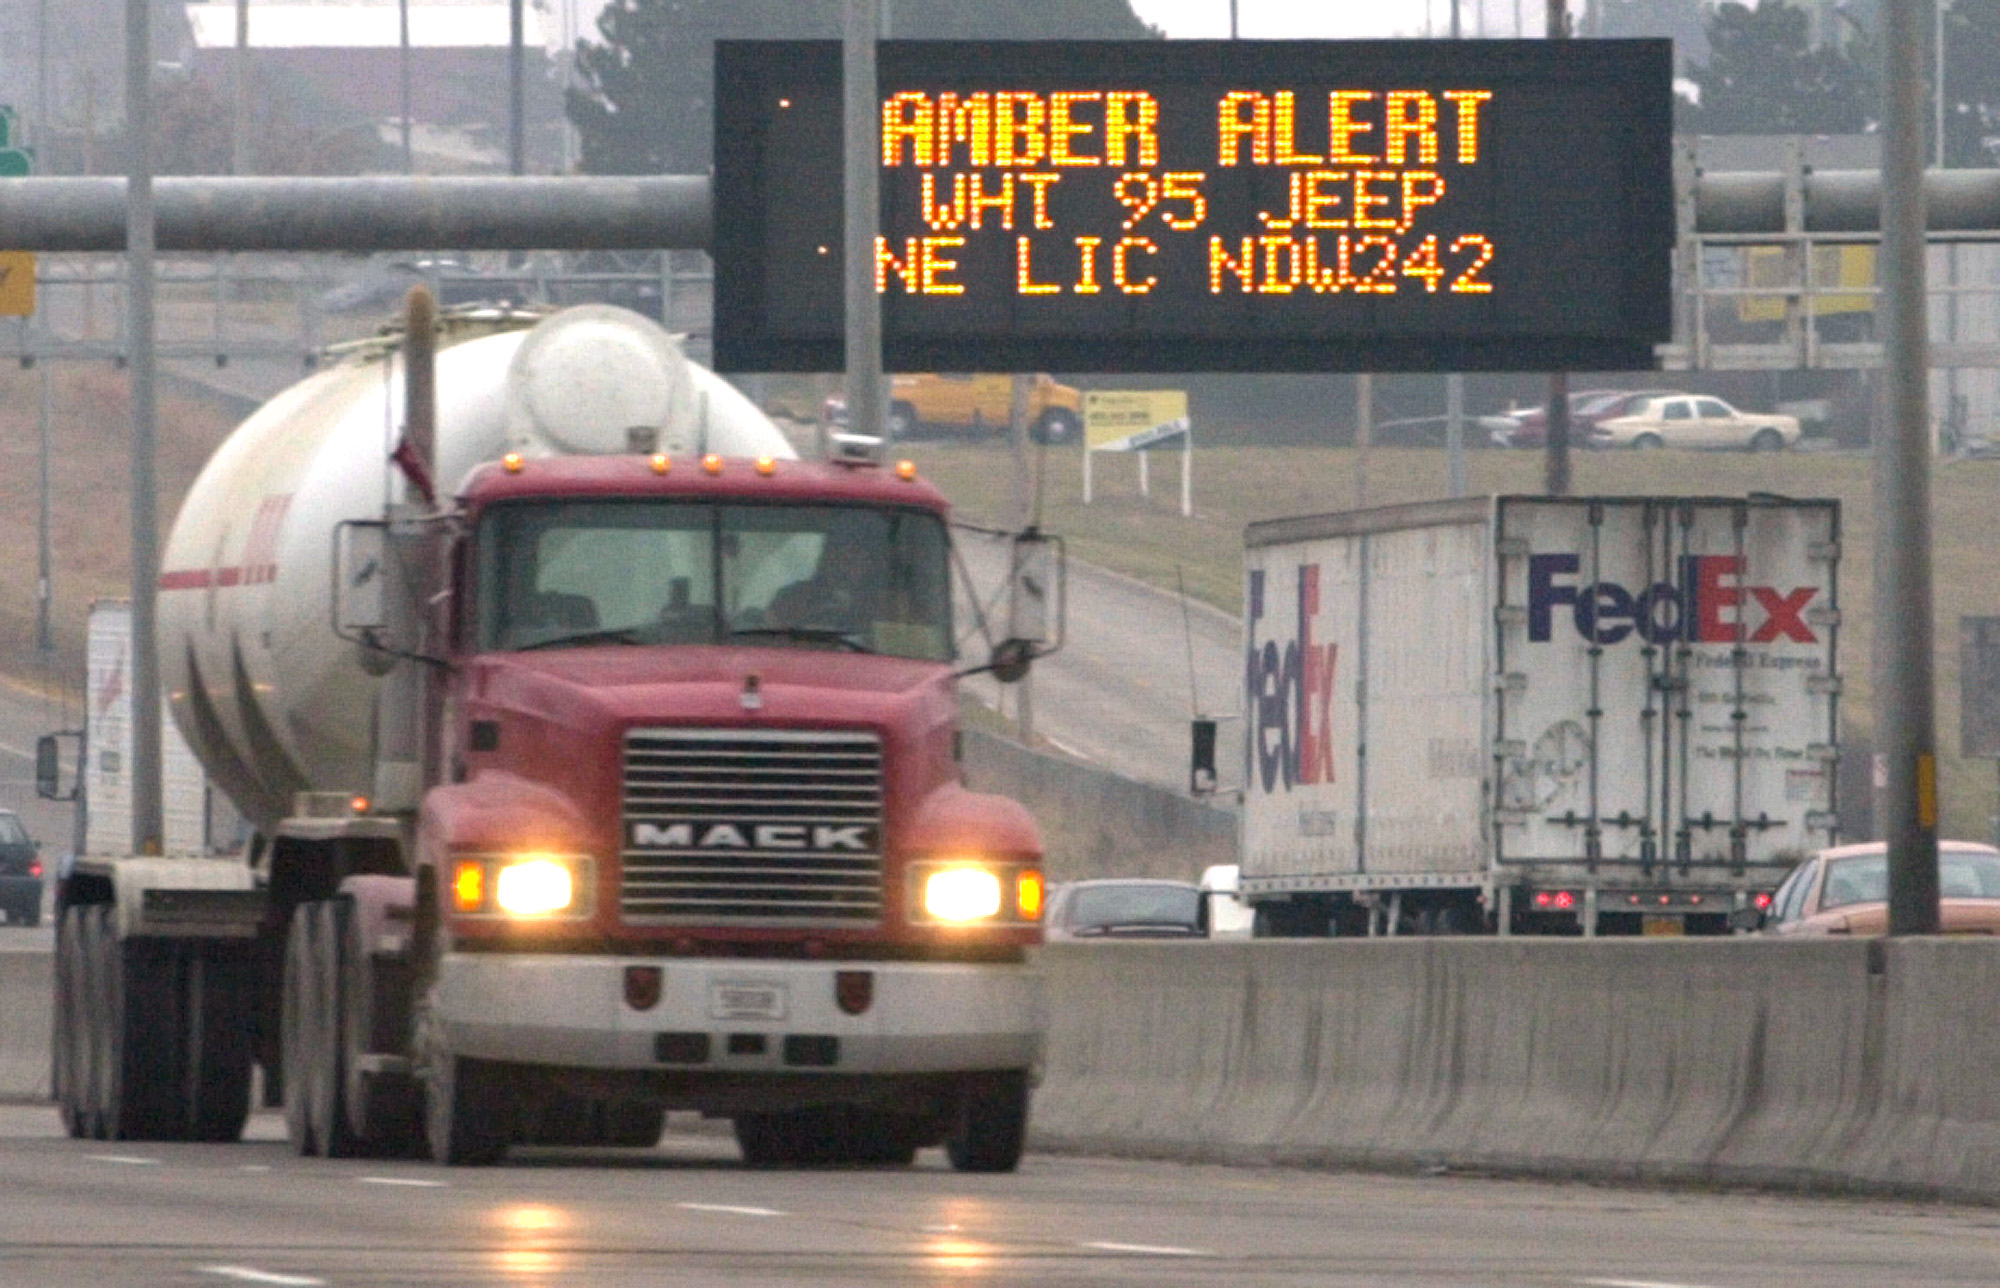 Electronic signs flash with an amber alert over Interstate 80 in Omaha, Neb.